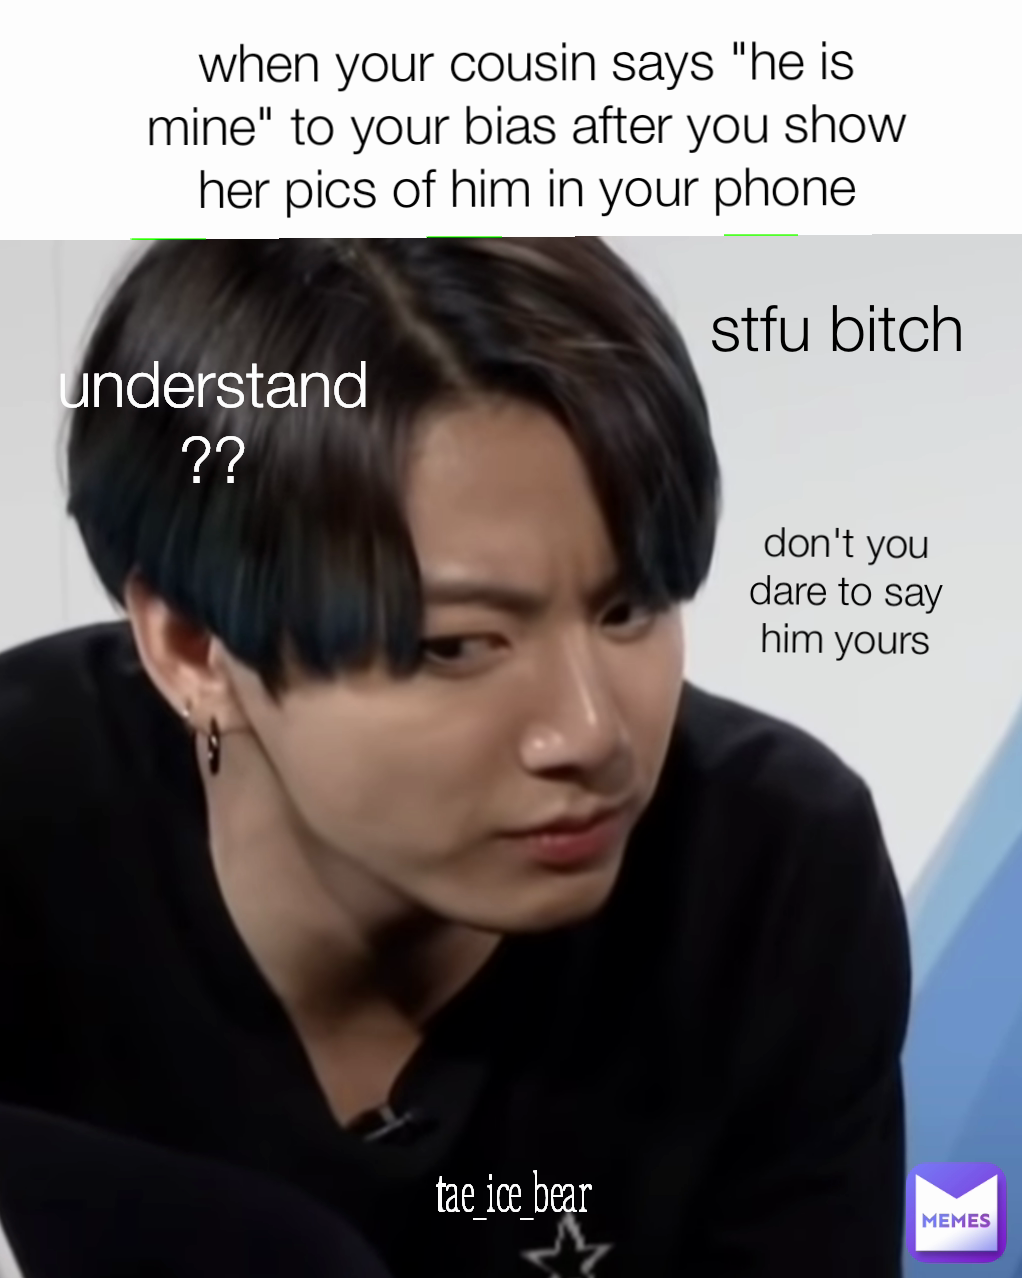 when your cousin says "he is mine" to your bias after you show her pics of him in your phone understand?? stfu bitch tae_ice_bear don't you dare to say him yours